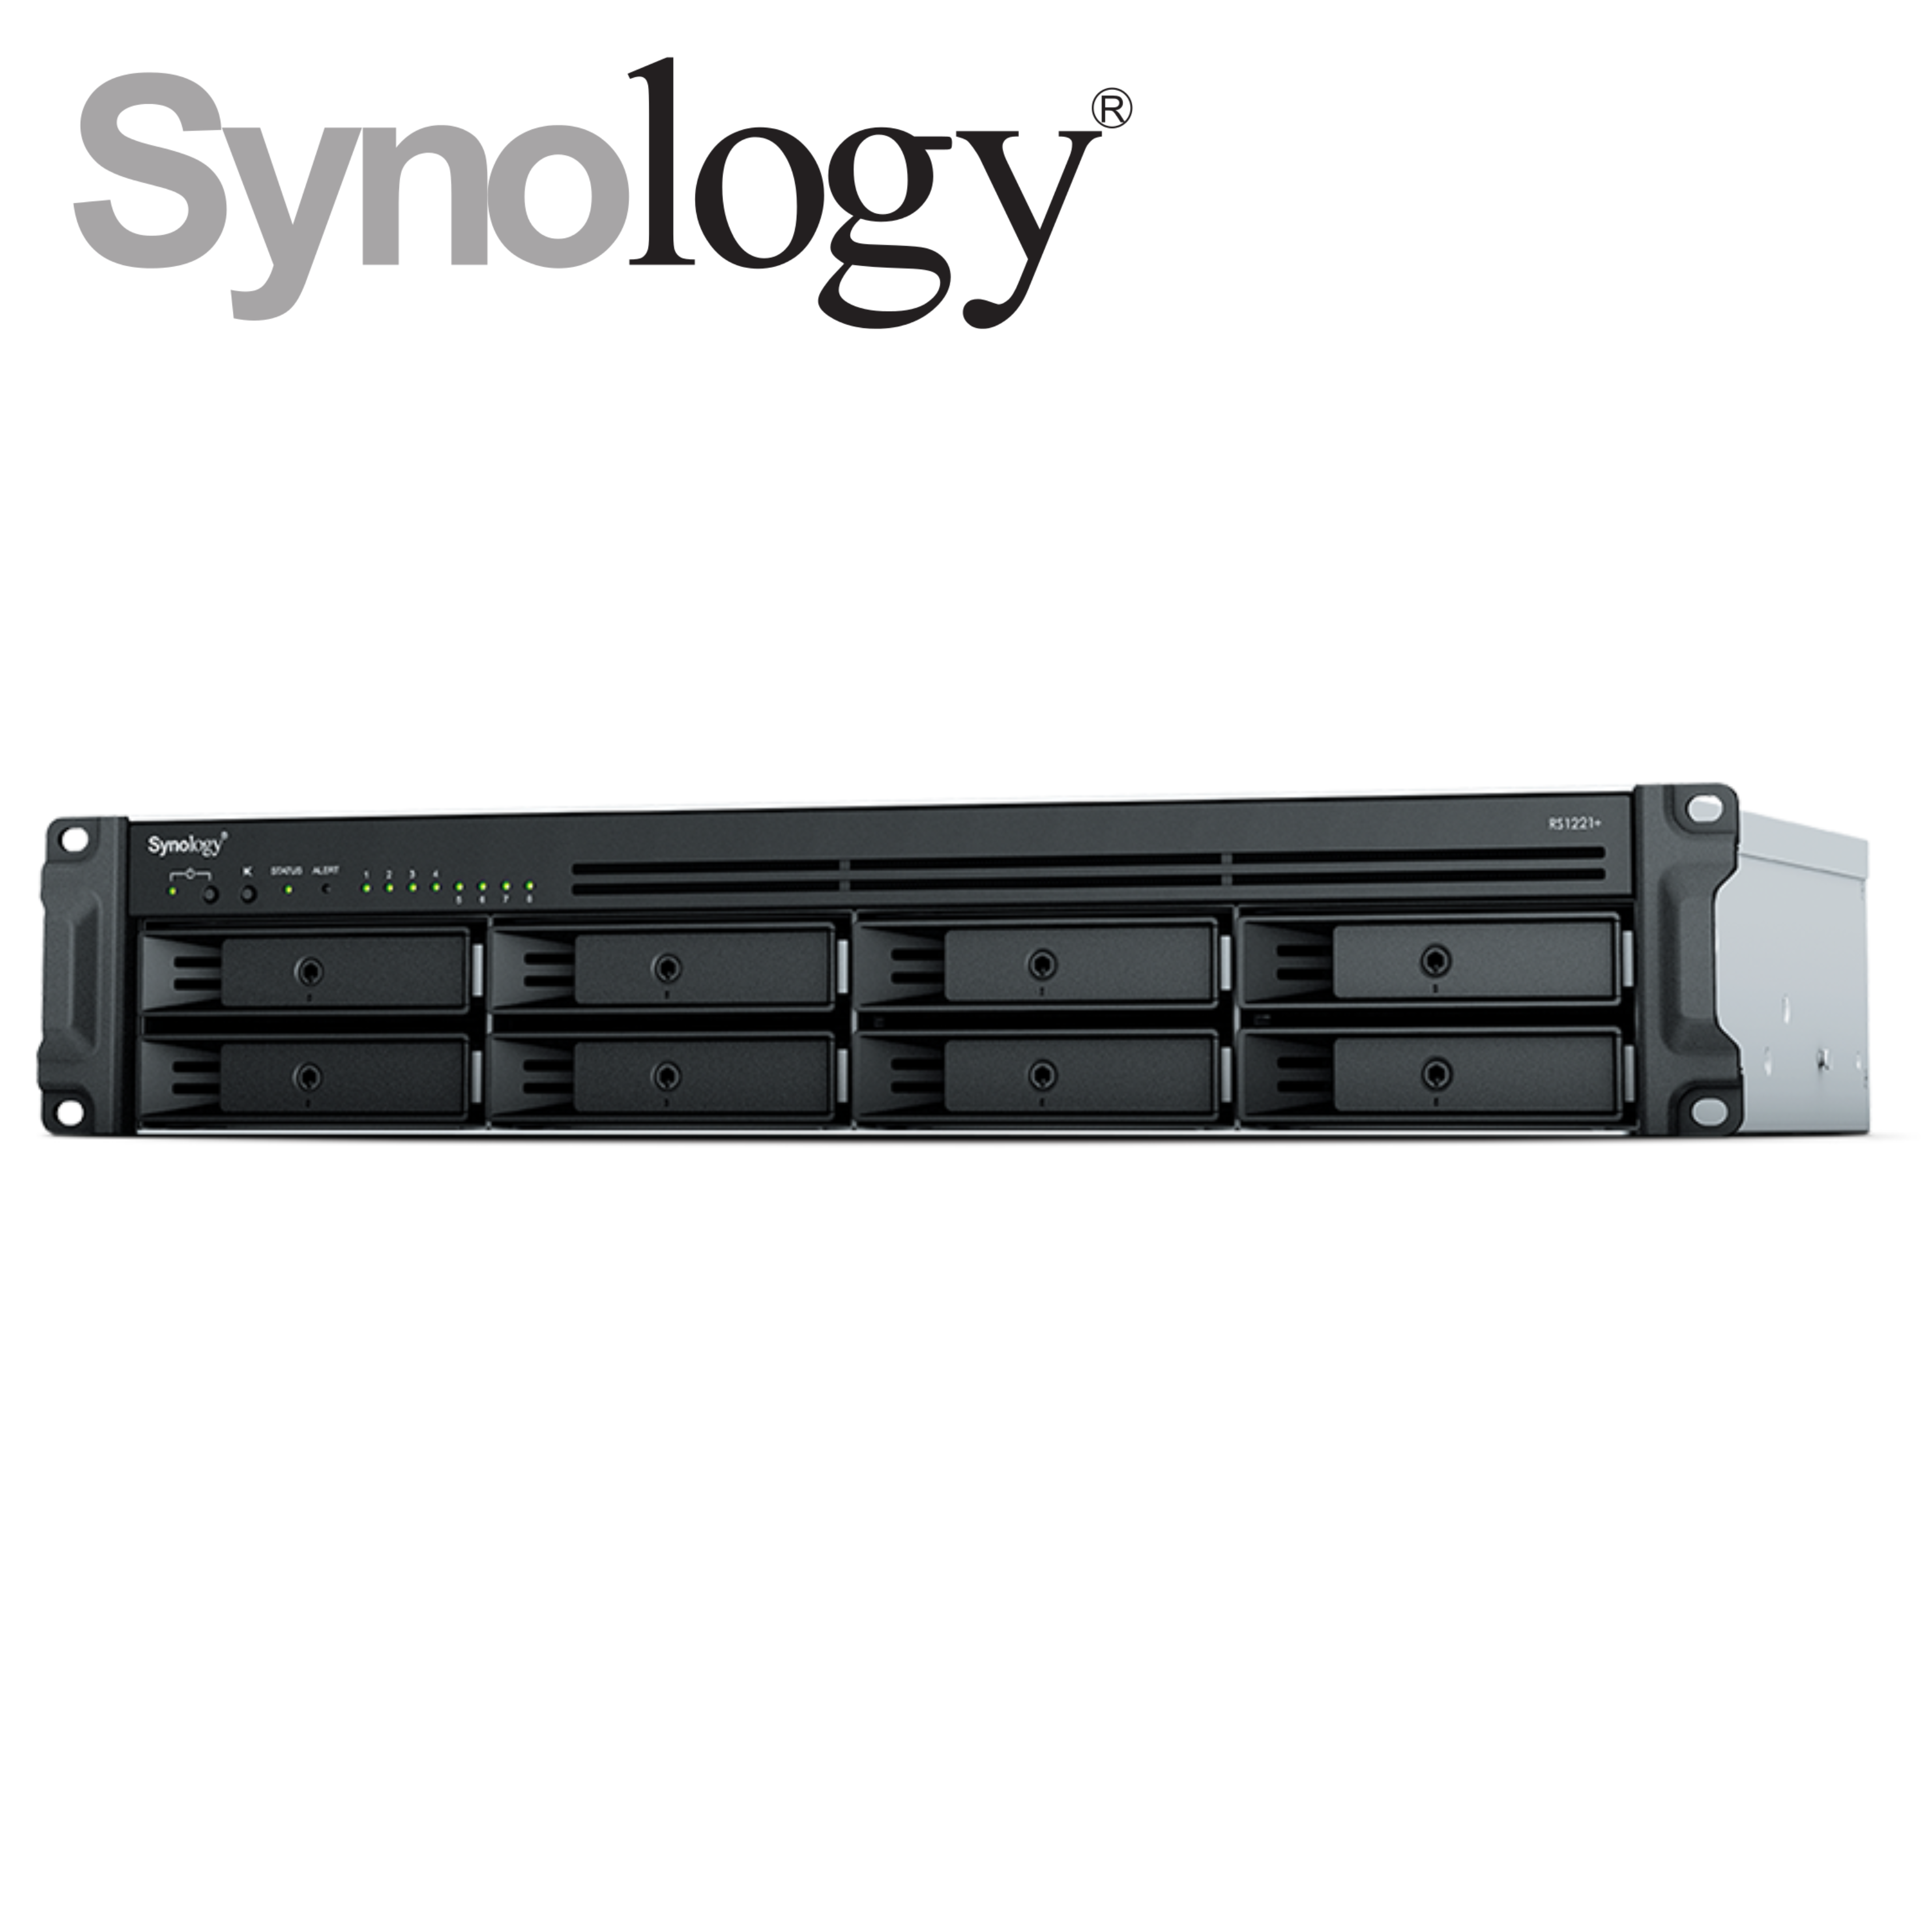 Synology RS1221+/ RS1221RP+ RackStation